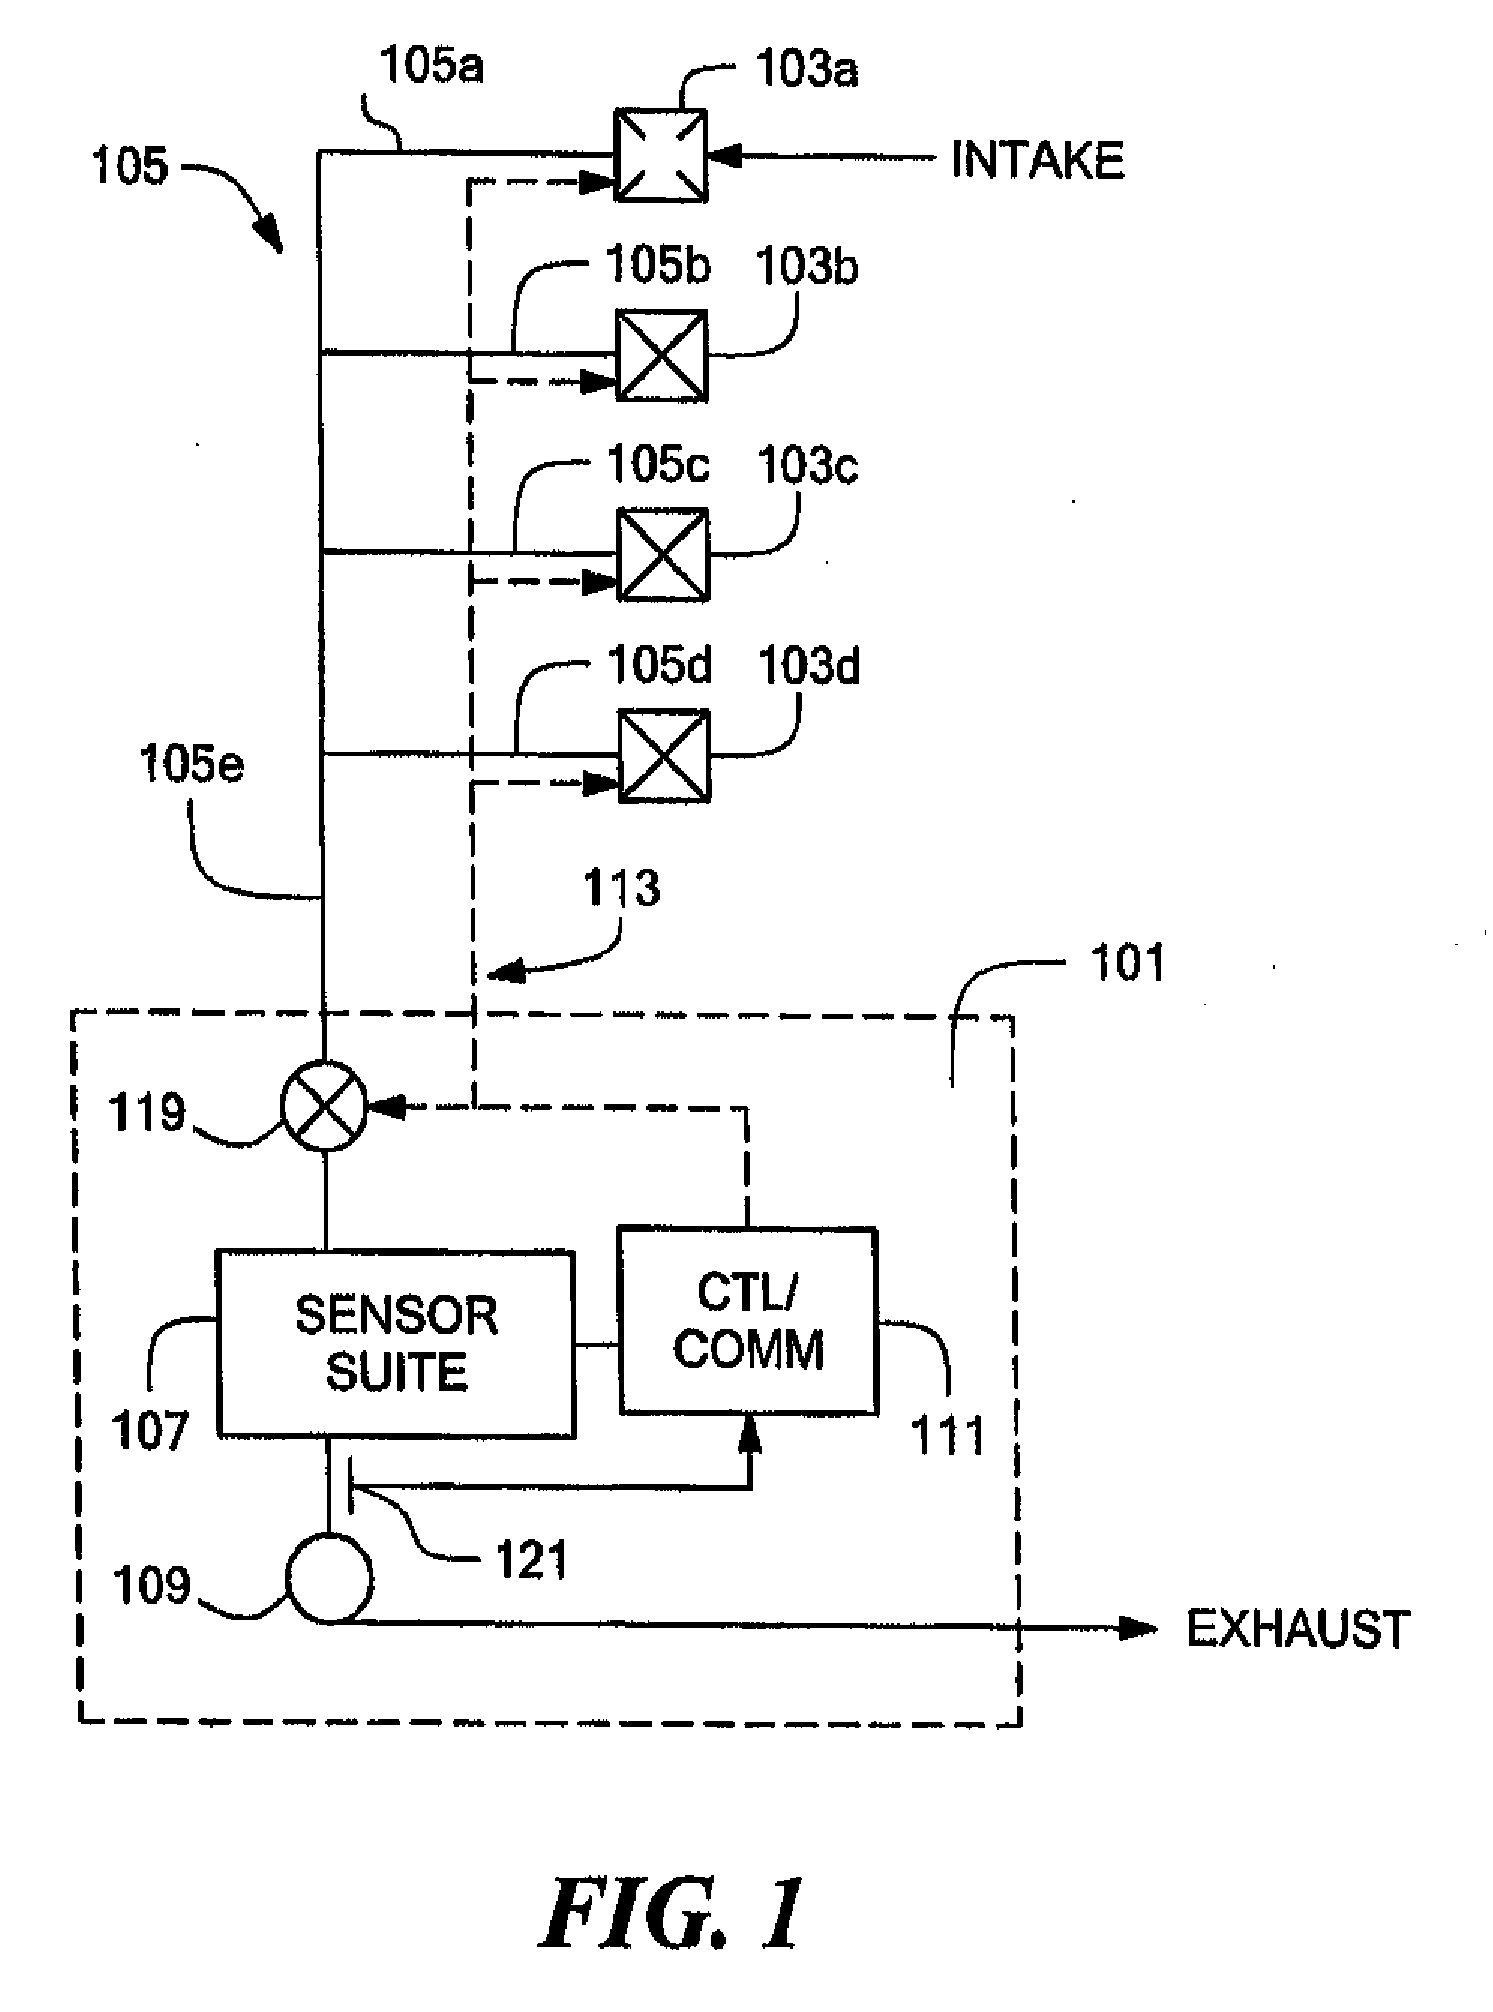 Tubing for transporting air samples in an air monitoring system